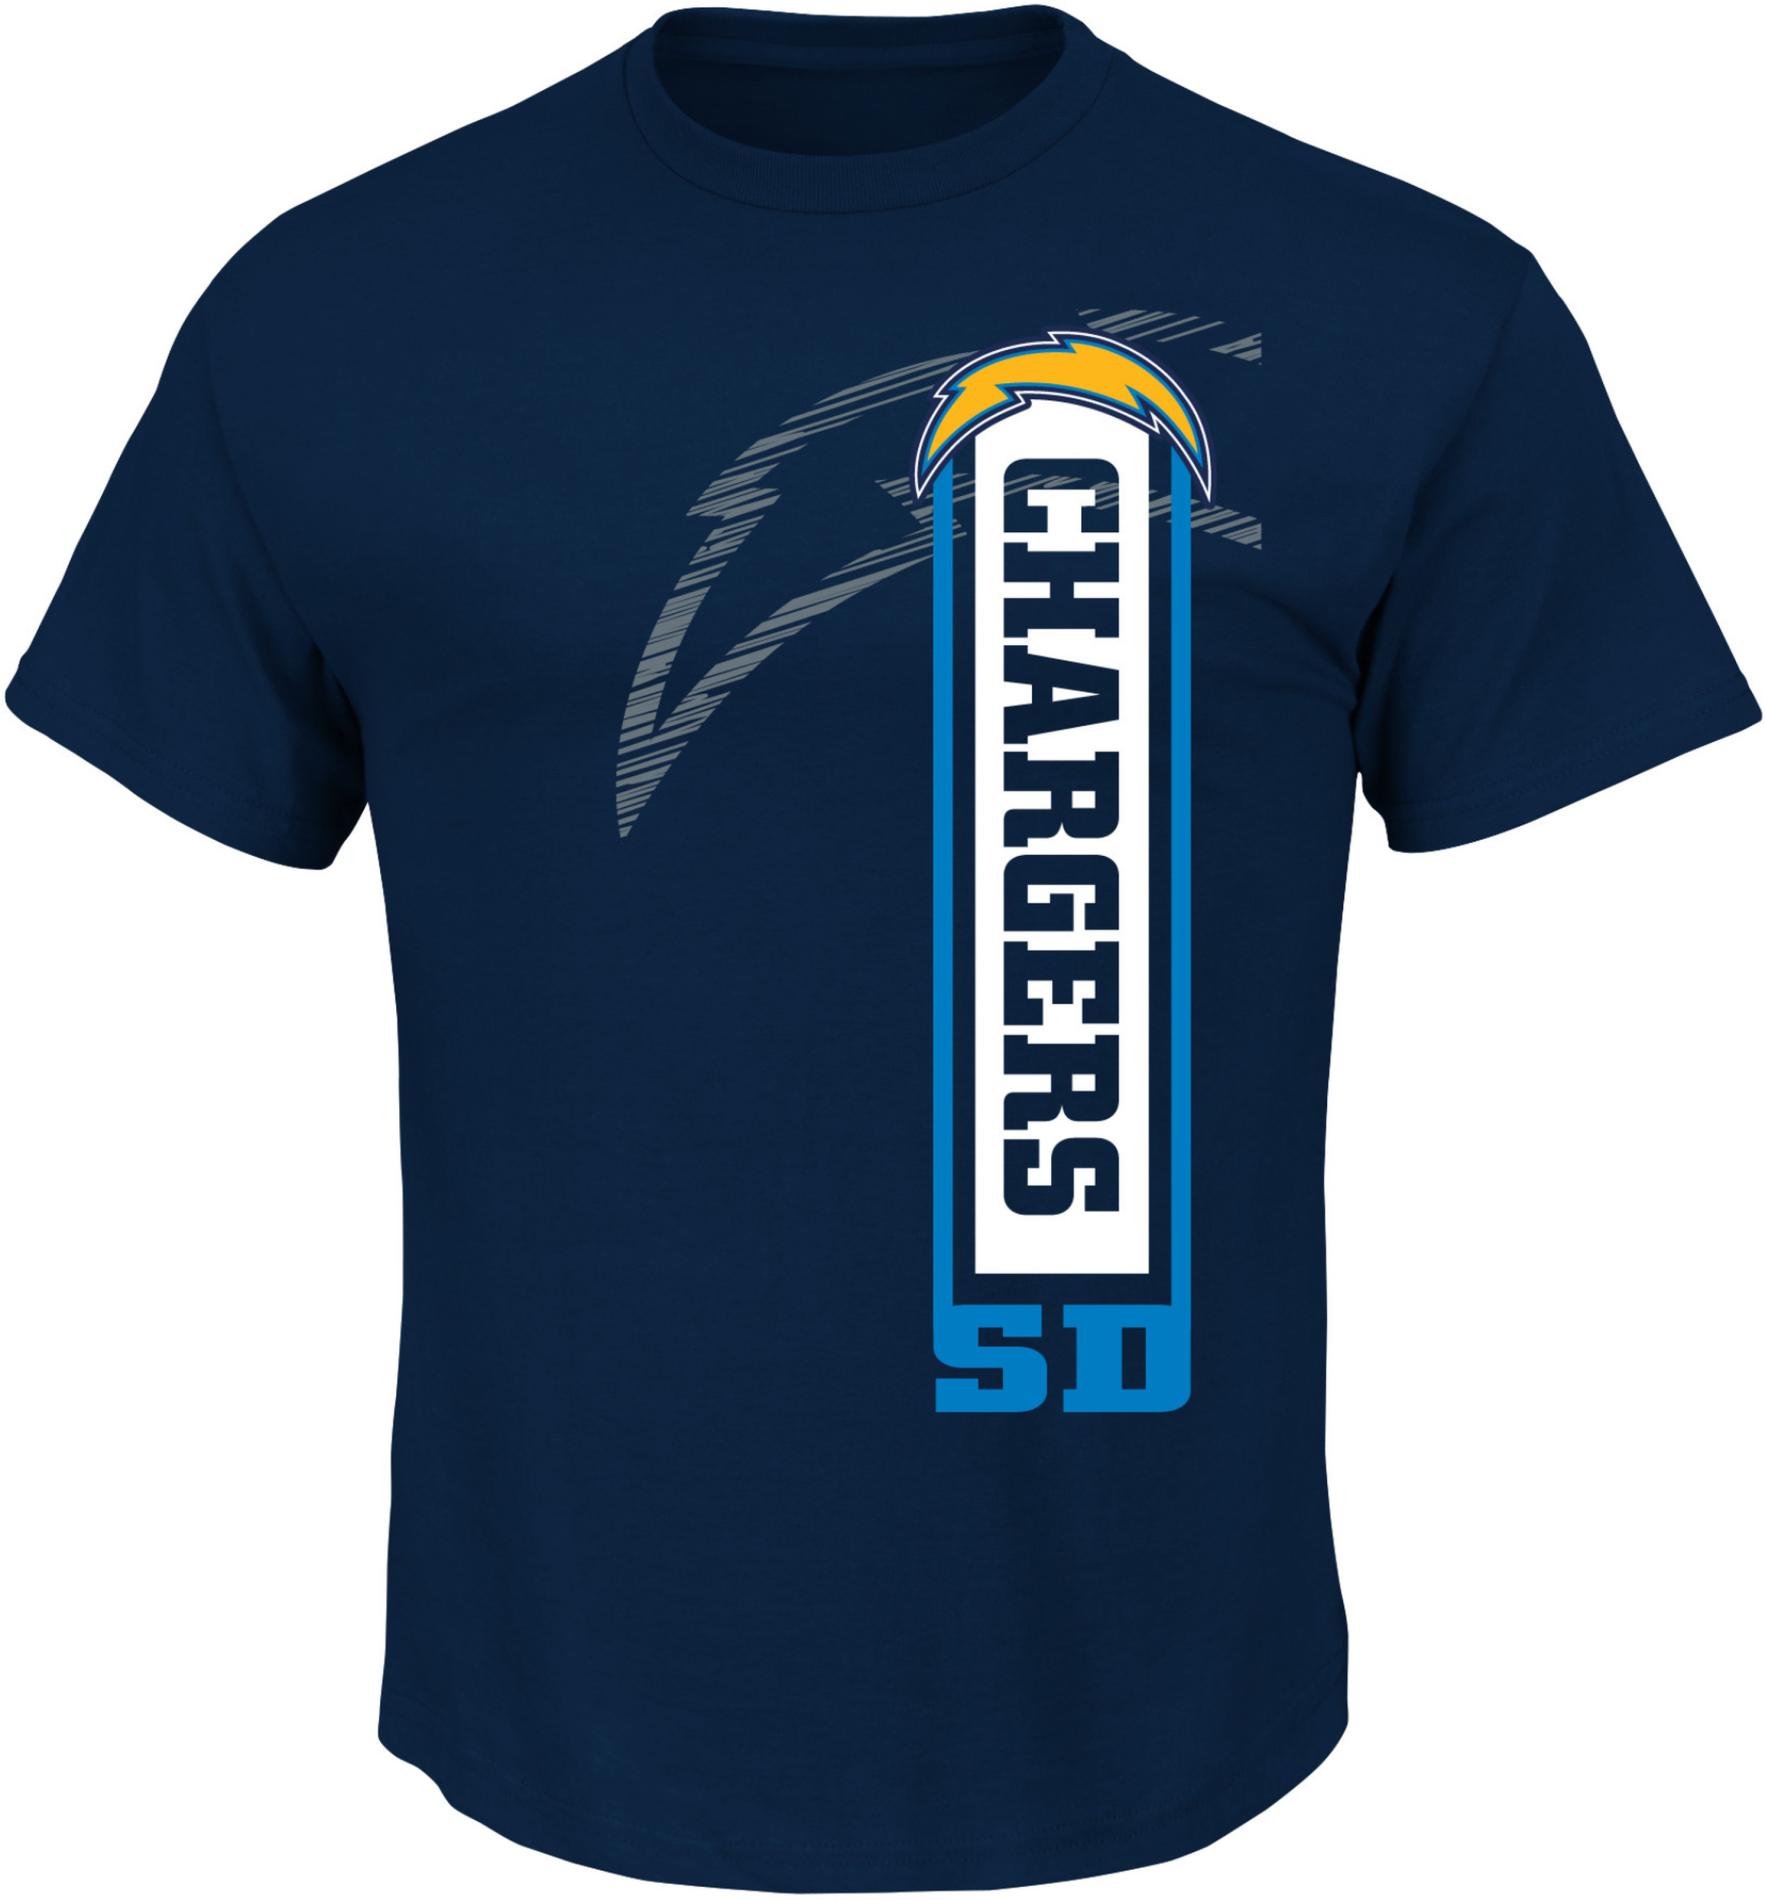 NFL Men's Short-Sleeve T-Shirt - San Diego Chargers